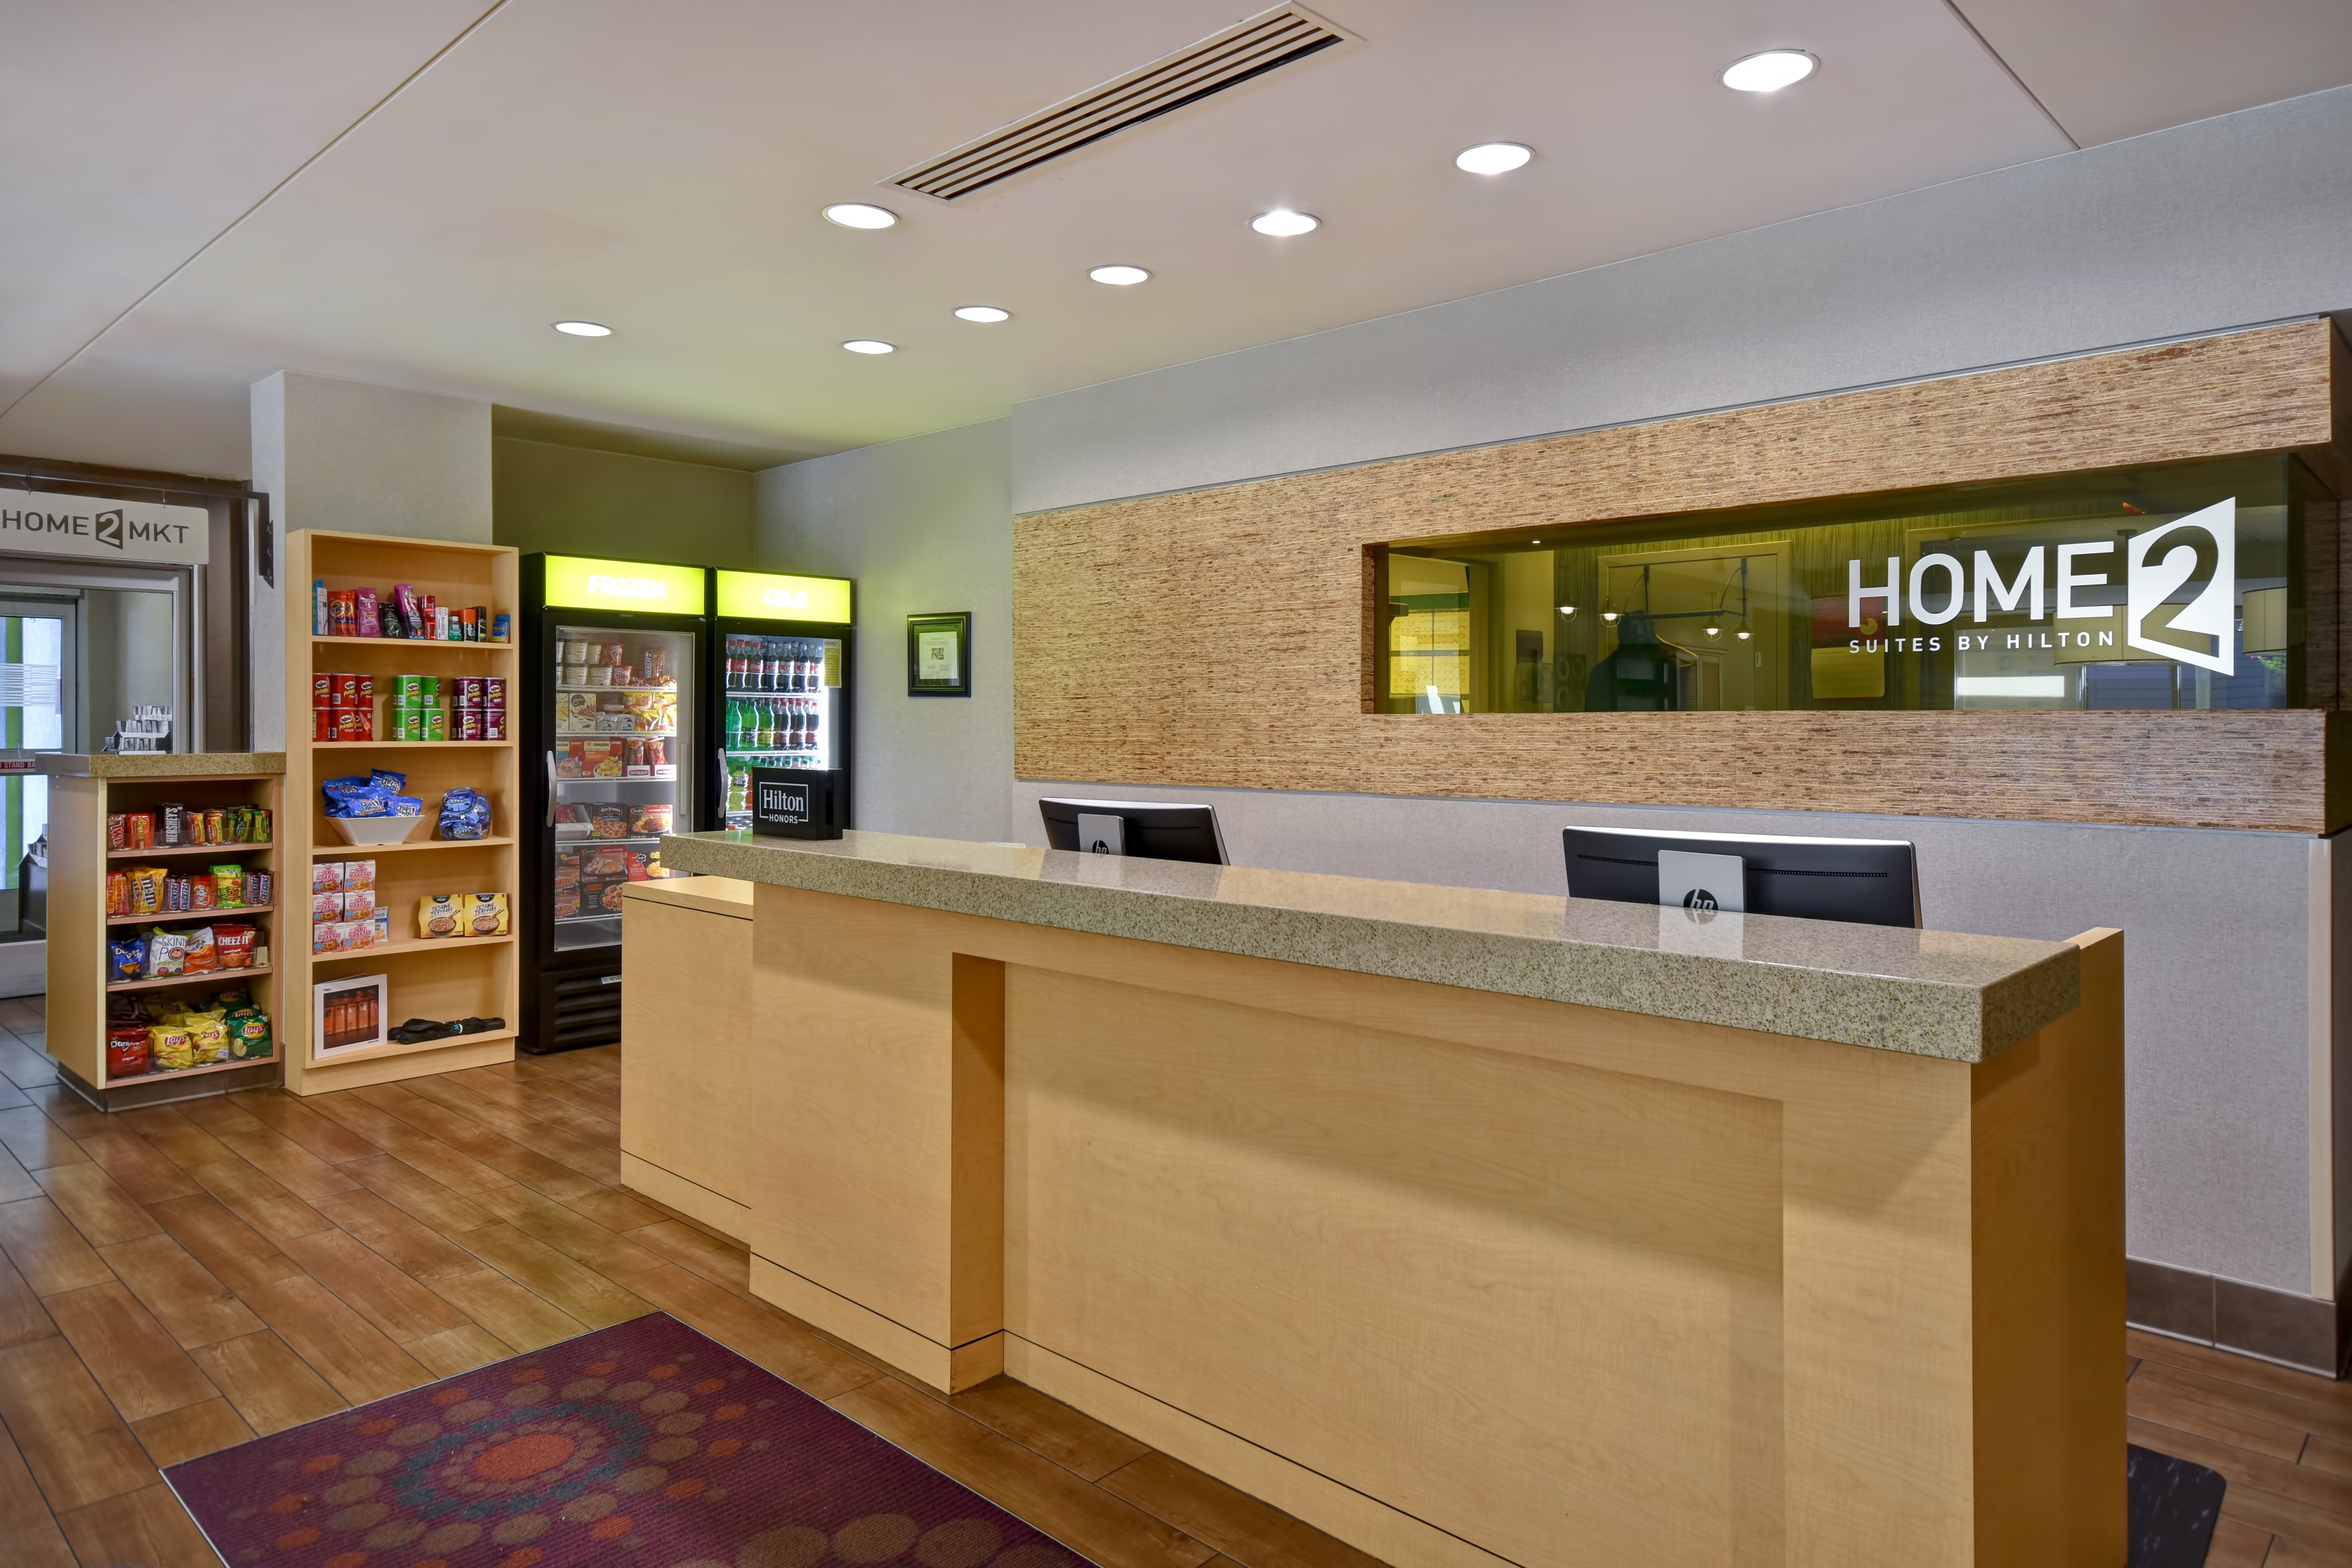 lobby front desk and snack shop